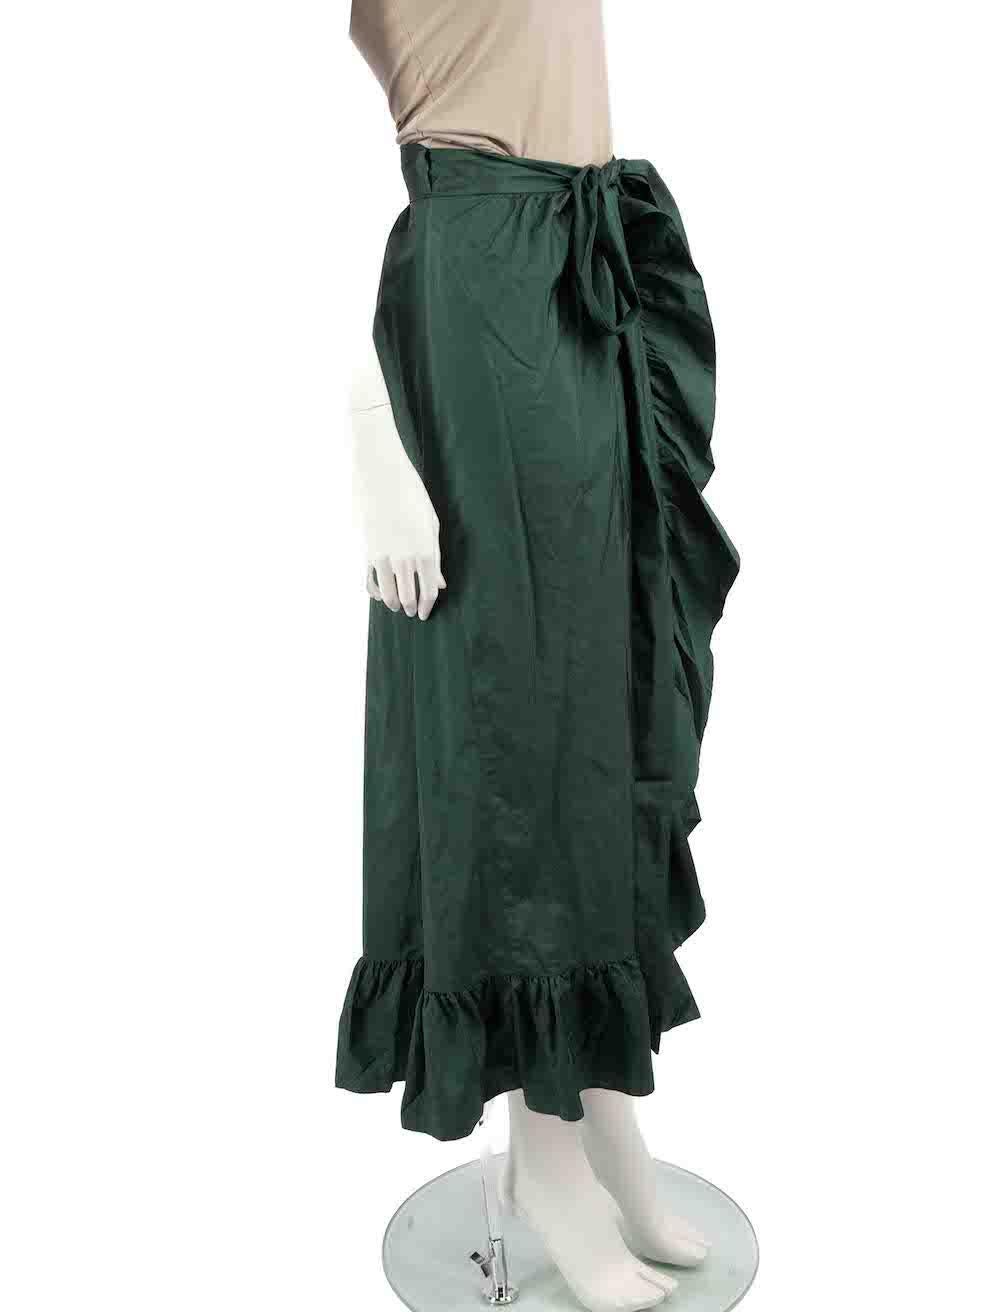 CONDITION is Very good. Hardly any visible wear to skirt is evident on this used Isabel Marant designer resale item.
 
 
 
 Details
 
 
 Green
 
 Synthetic
 
 Wrap skirt
 
 Midi
 
 Ruffle trim
 
 Tie fastening
 
 
 
 
 
 Made in Portugal
 
 
 
